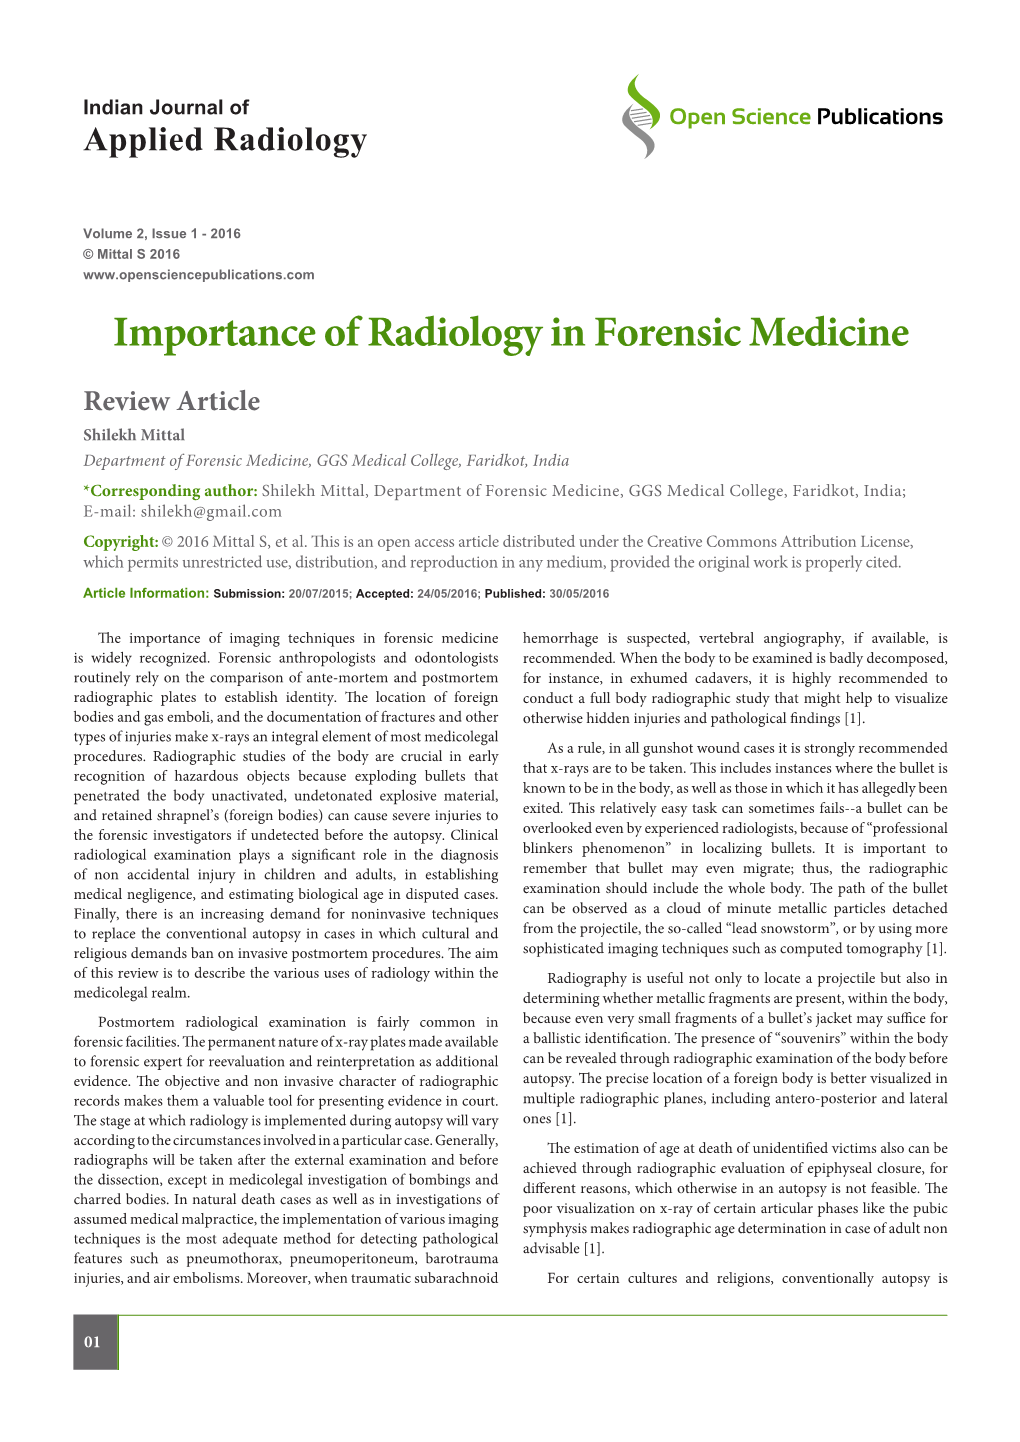 Importance of Radiology in Forensic Medicine